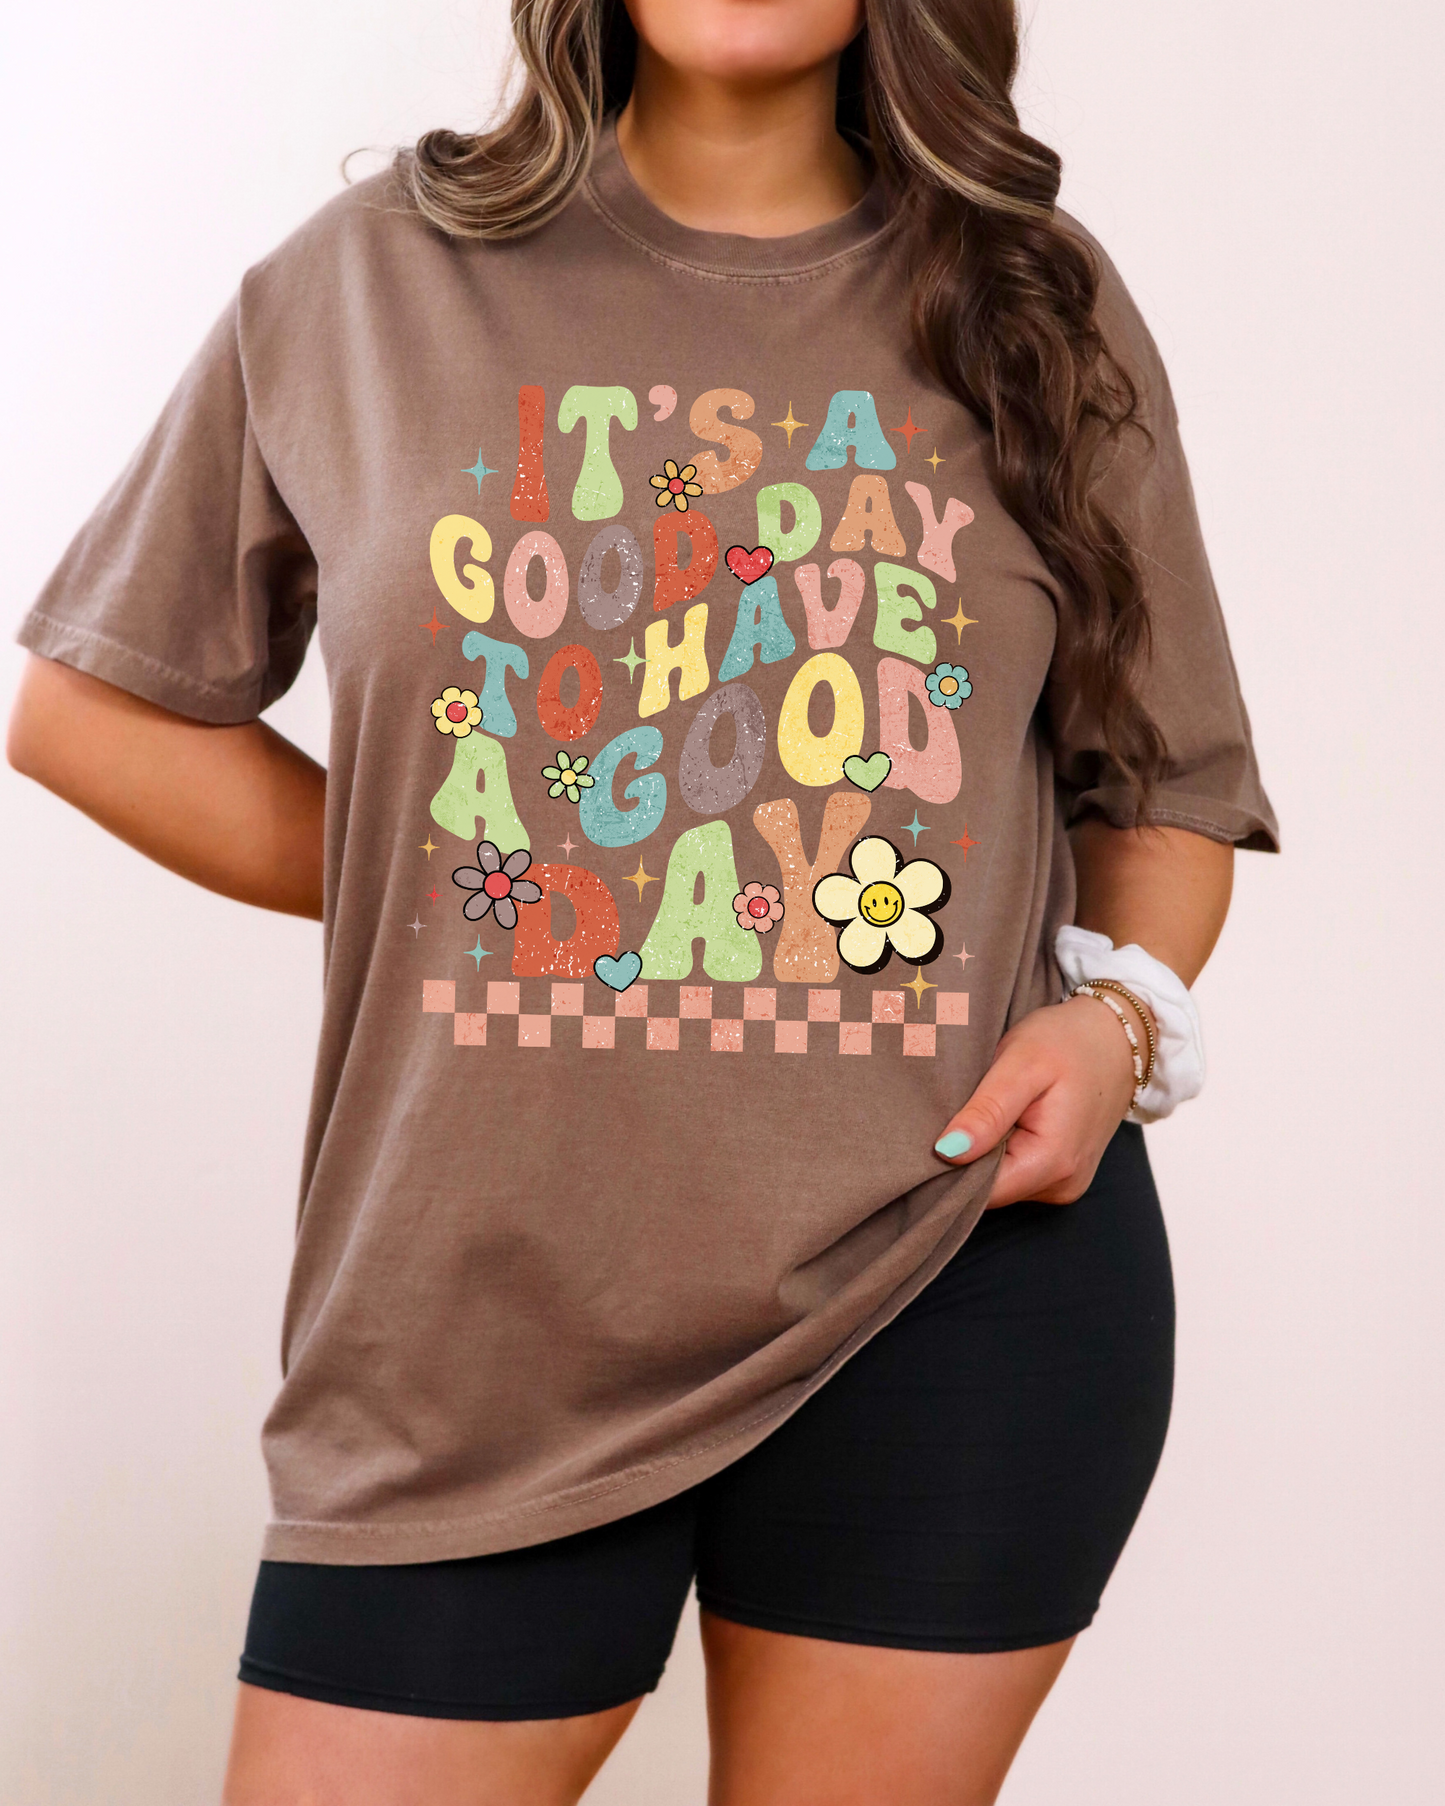 It's a Good Day to Have a Good Day Tee - Comfort Colors T-Shirt (PRE-ORDER)